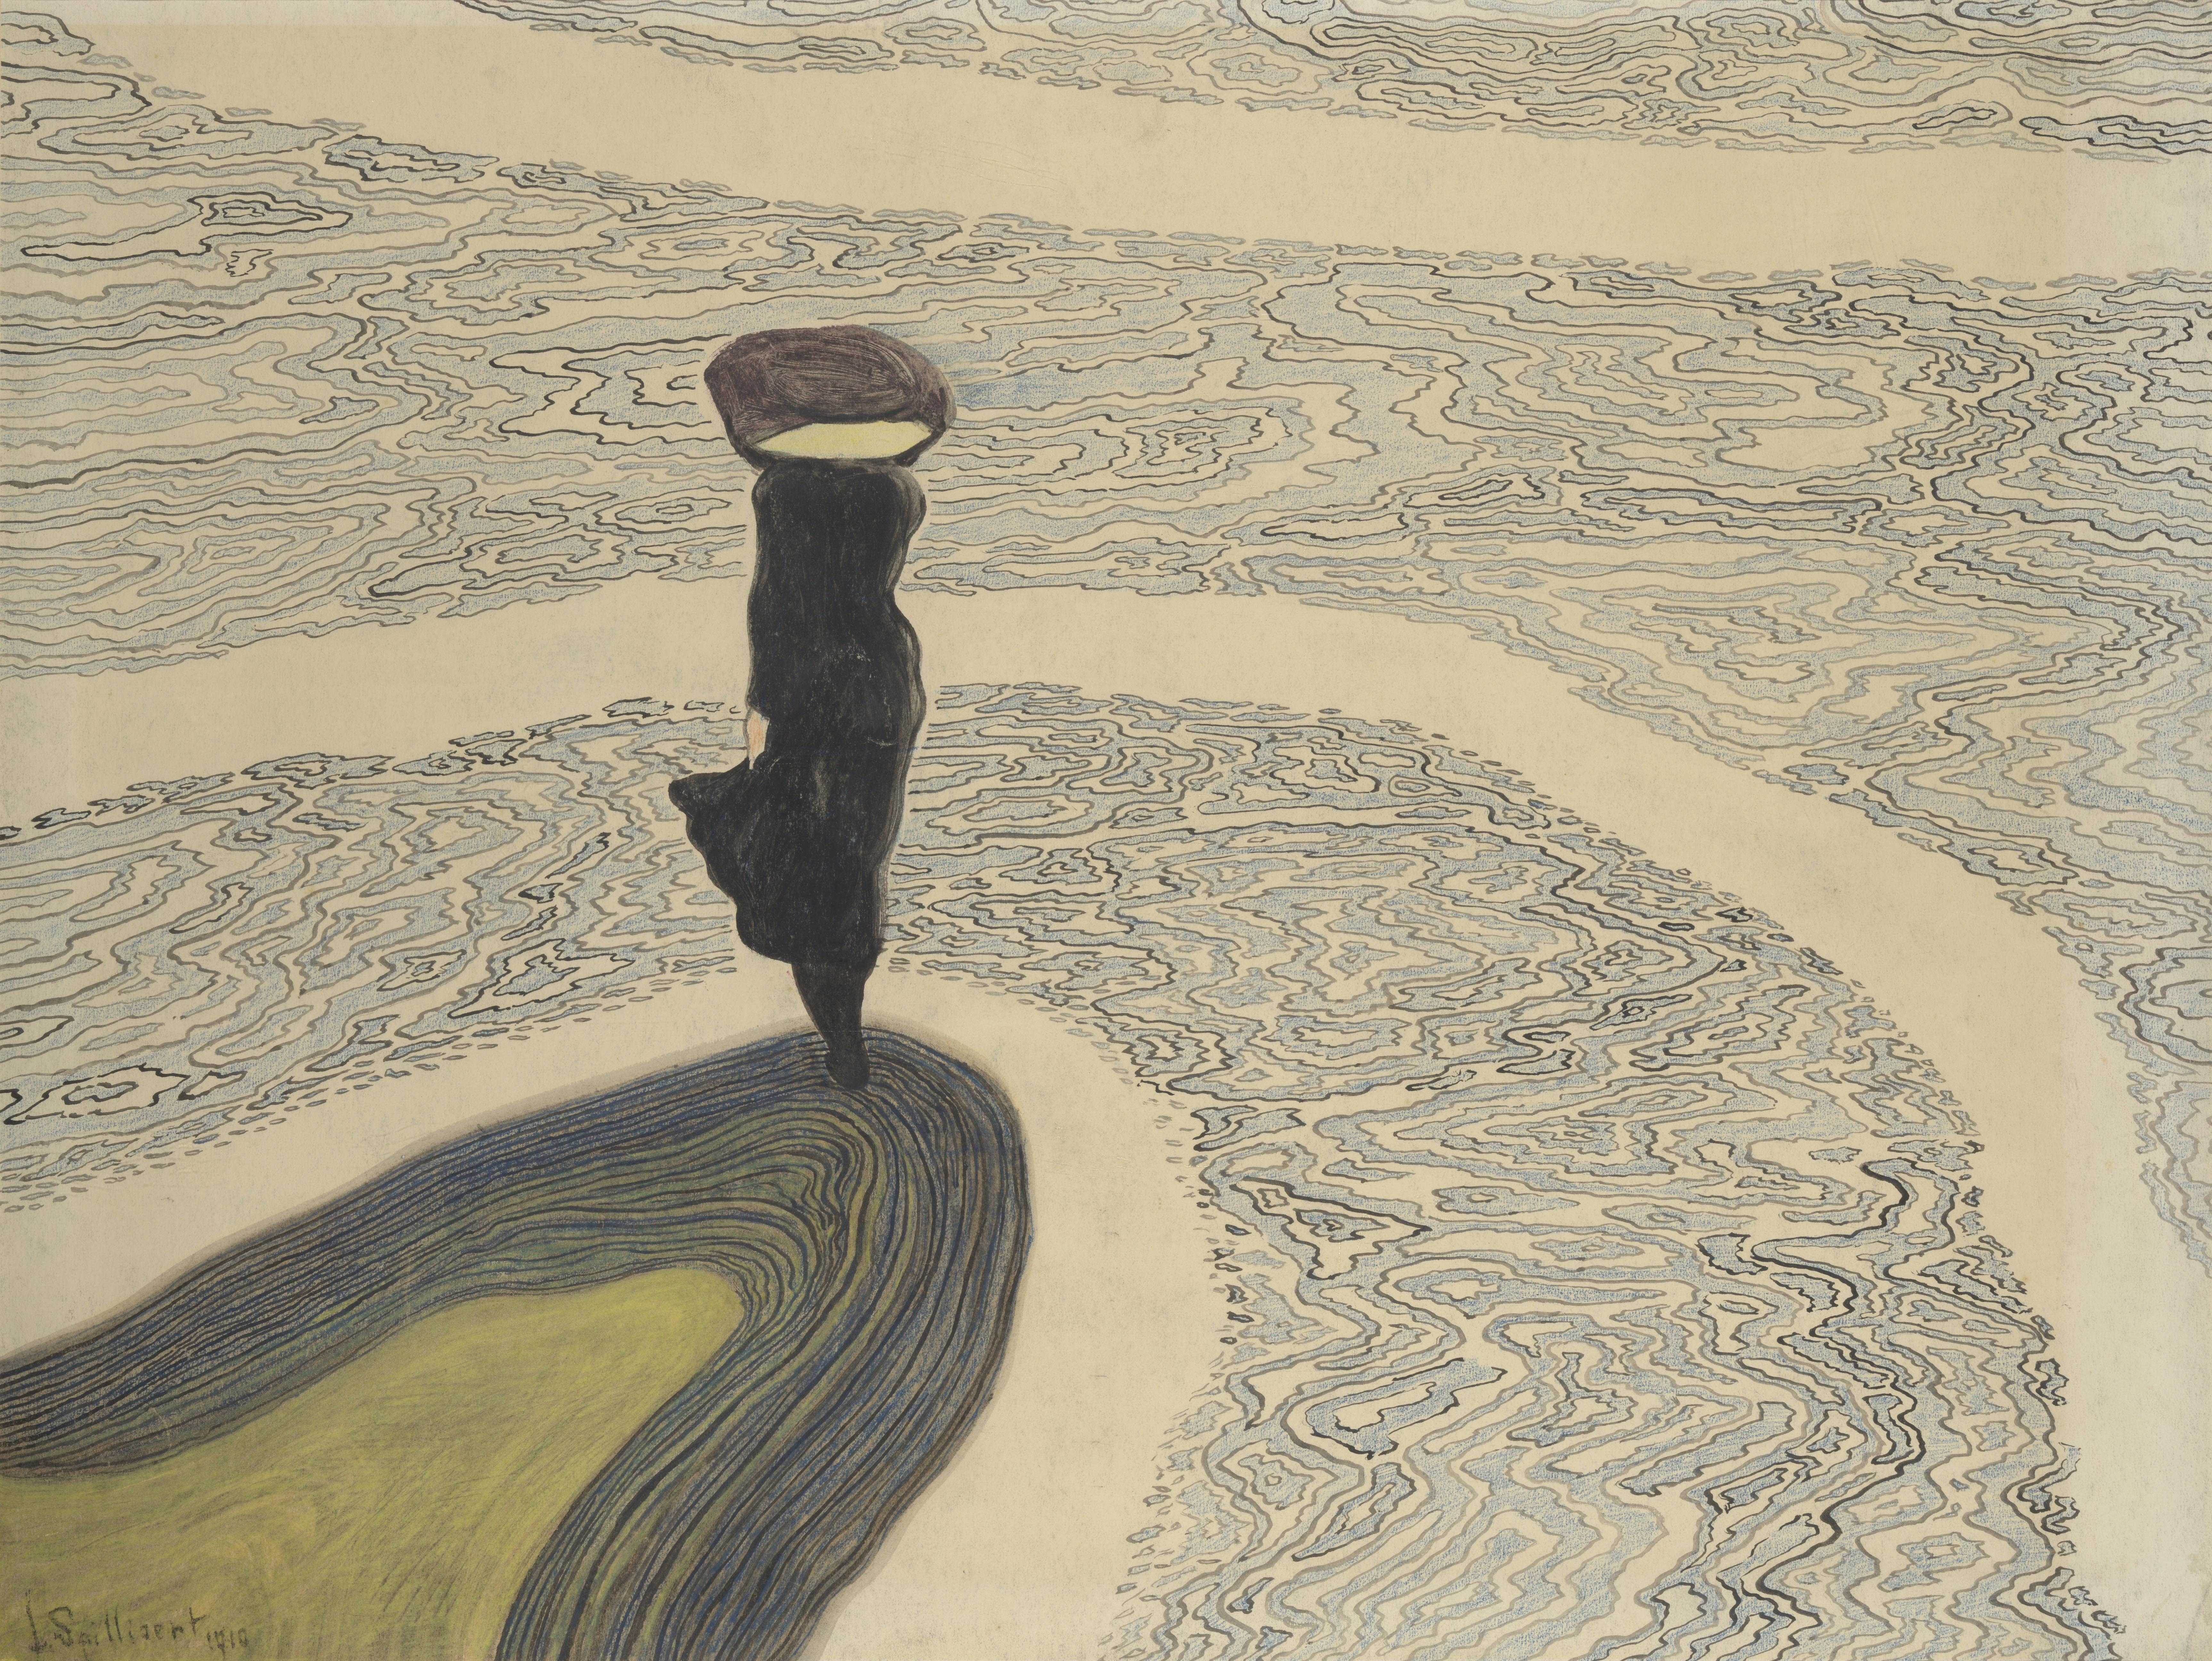 Léon Spilliaert, Woman at the Shoreline, 1910. Indian ink, coloured pencil and pastel on paper, 49 x 60 cm. Private collection. Photo: © Cedric Verhelst